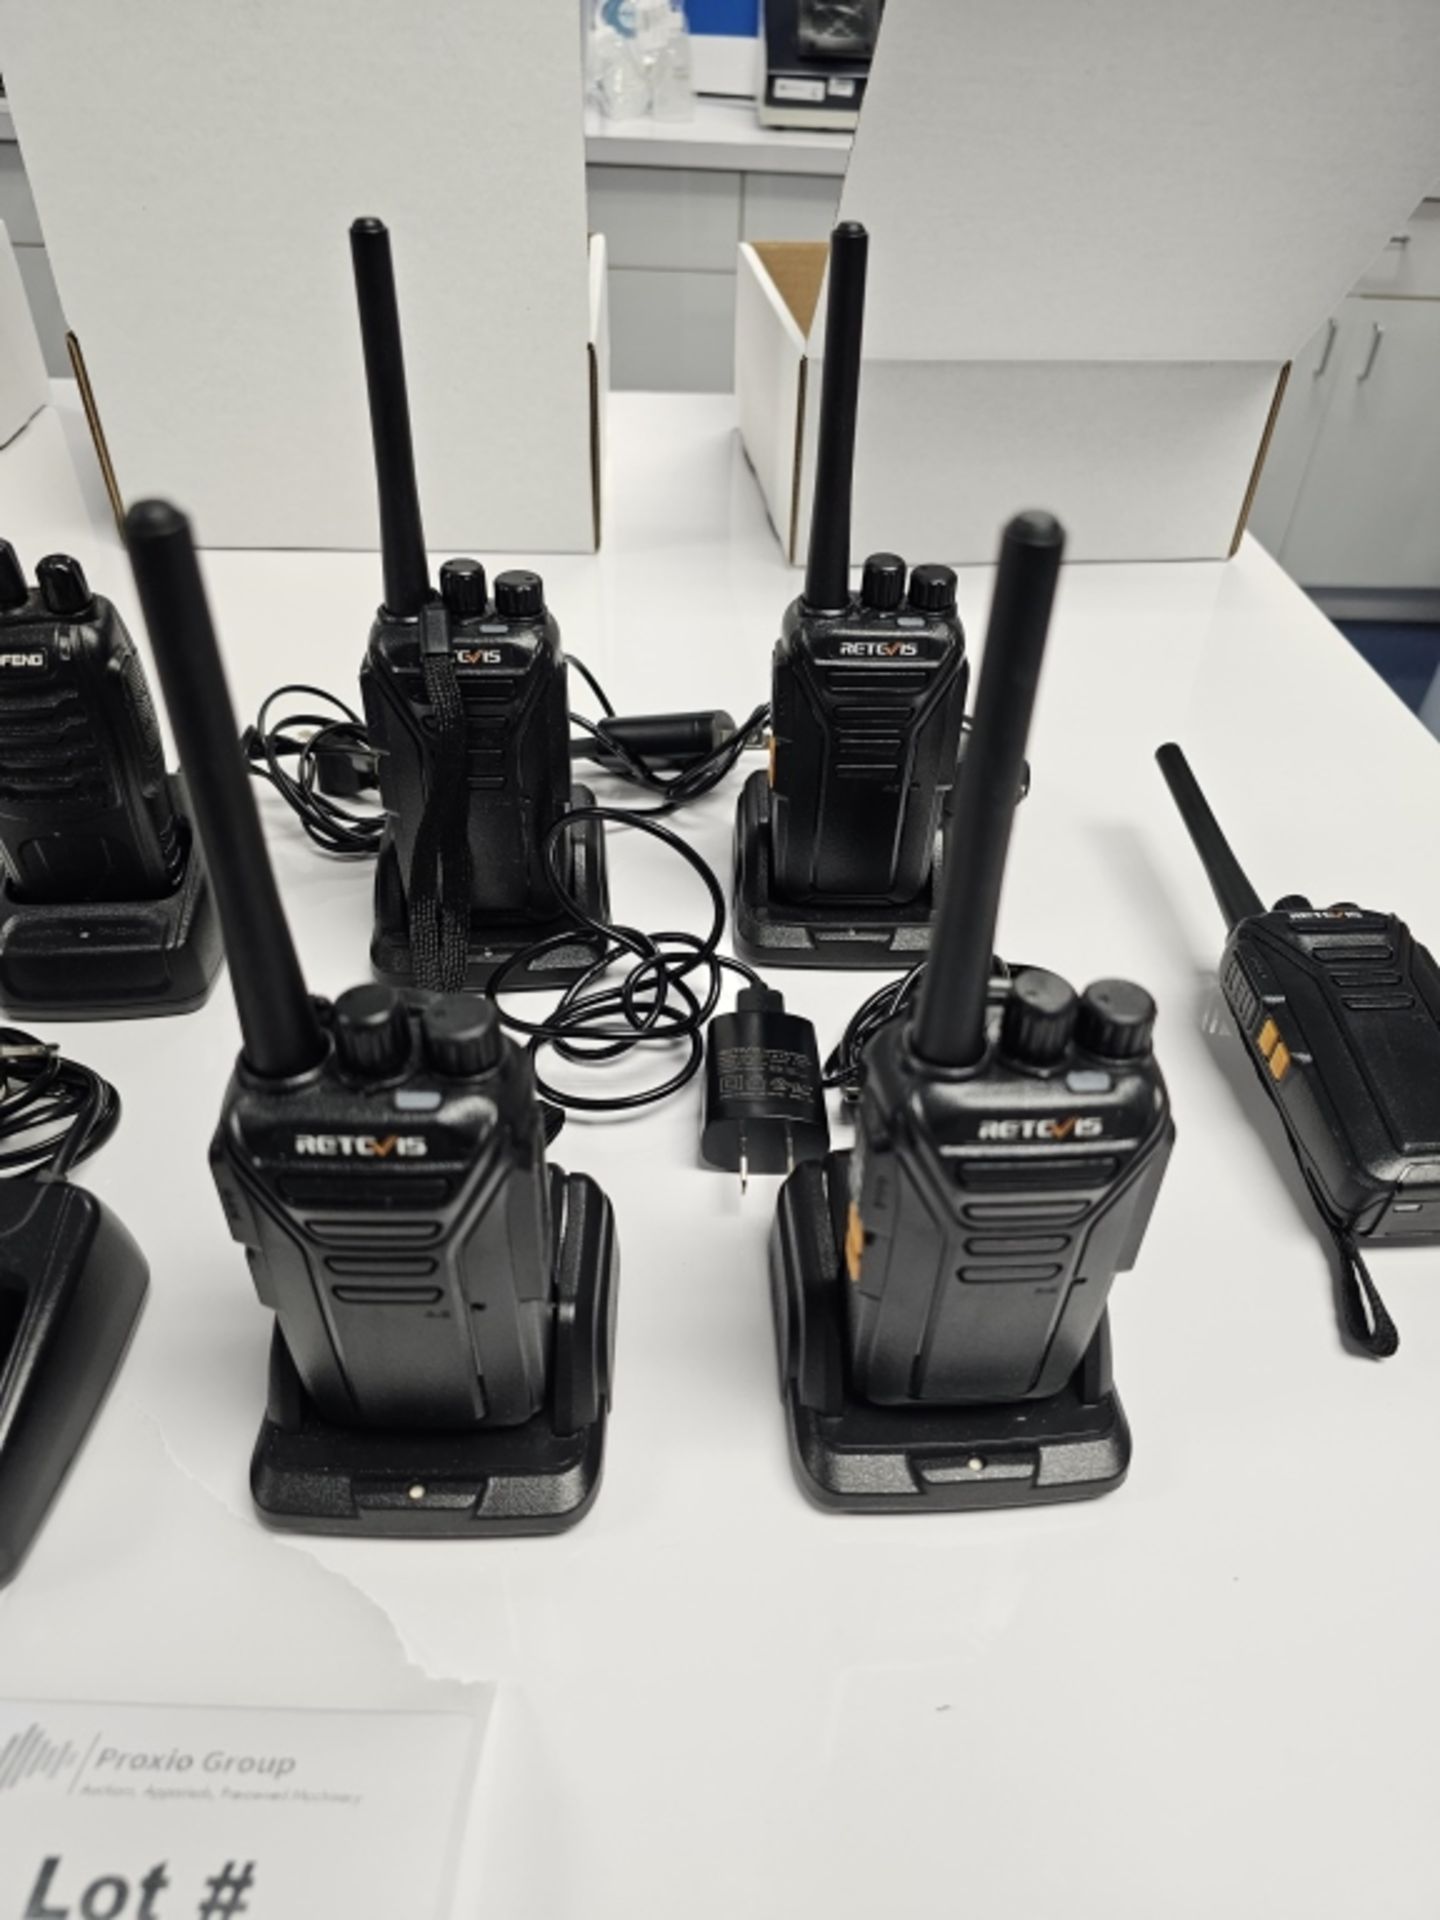 (5) Retcvis Hand Held Walkie Talkies With (4) Chargers, (2) Baofeng Walkie Talkies With Chargers - Image 4 of 5